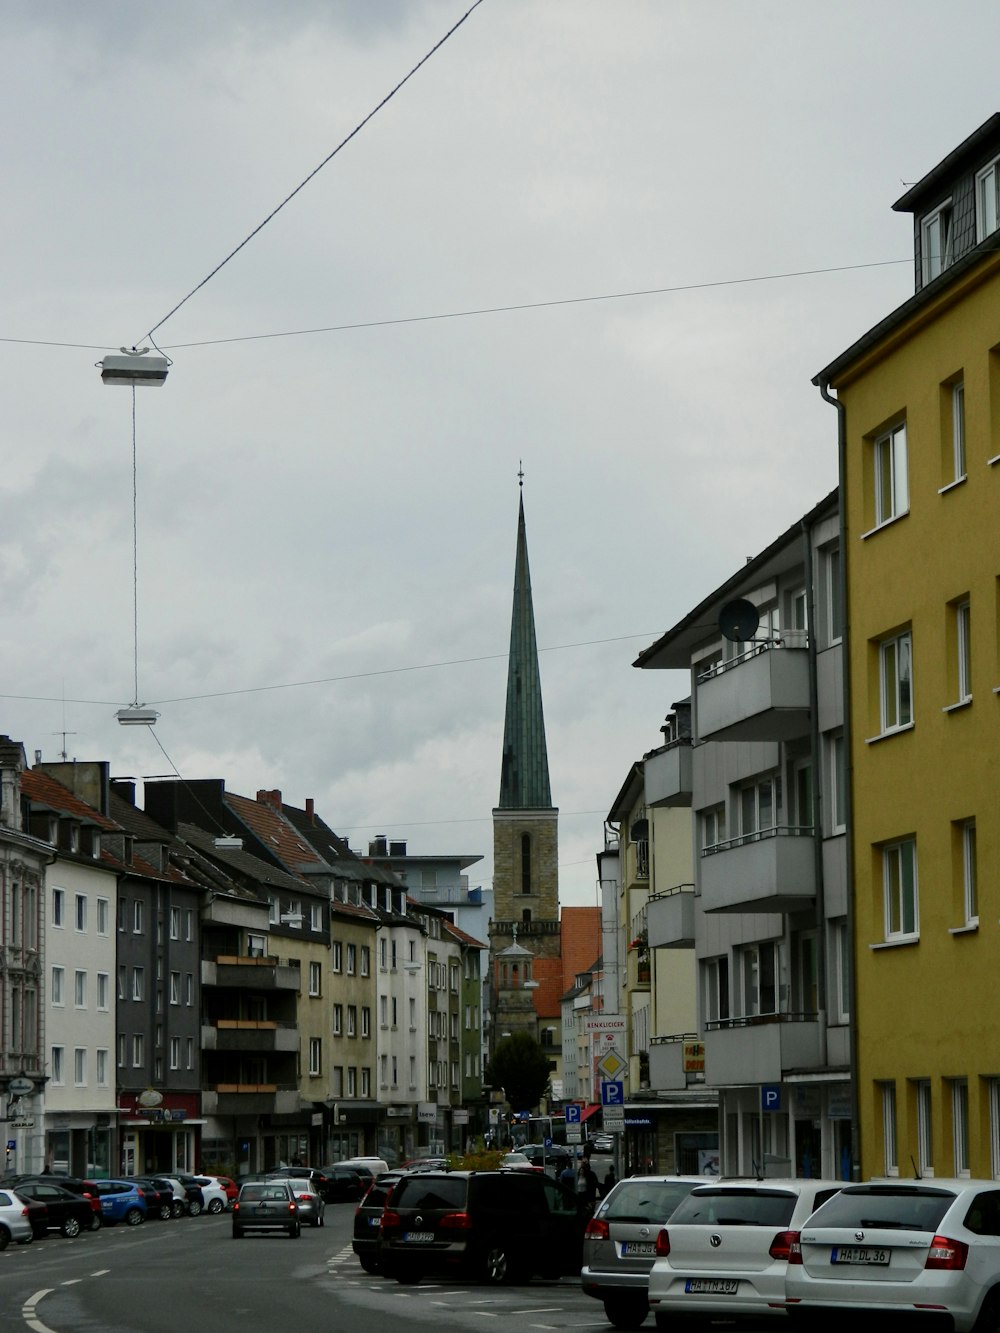 a city street with cars and a church steeple in the background